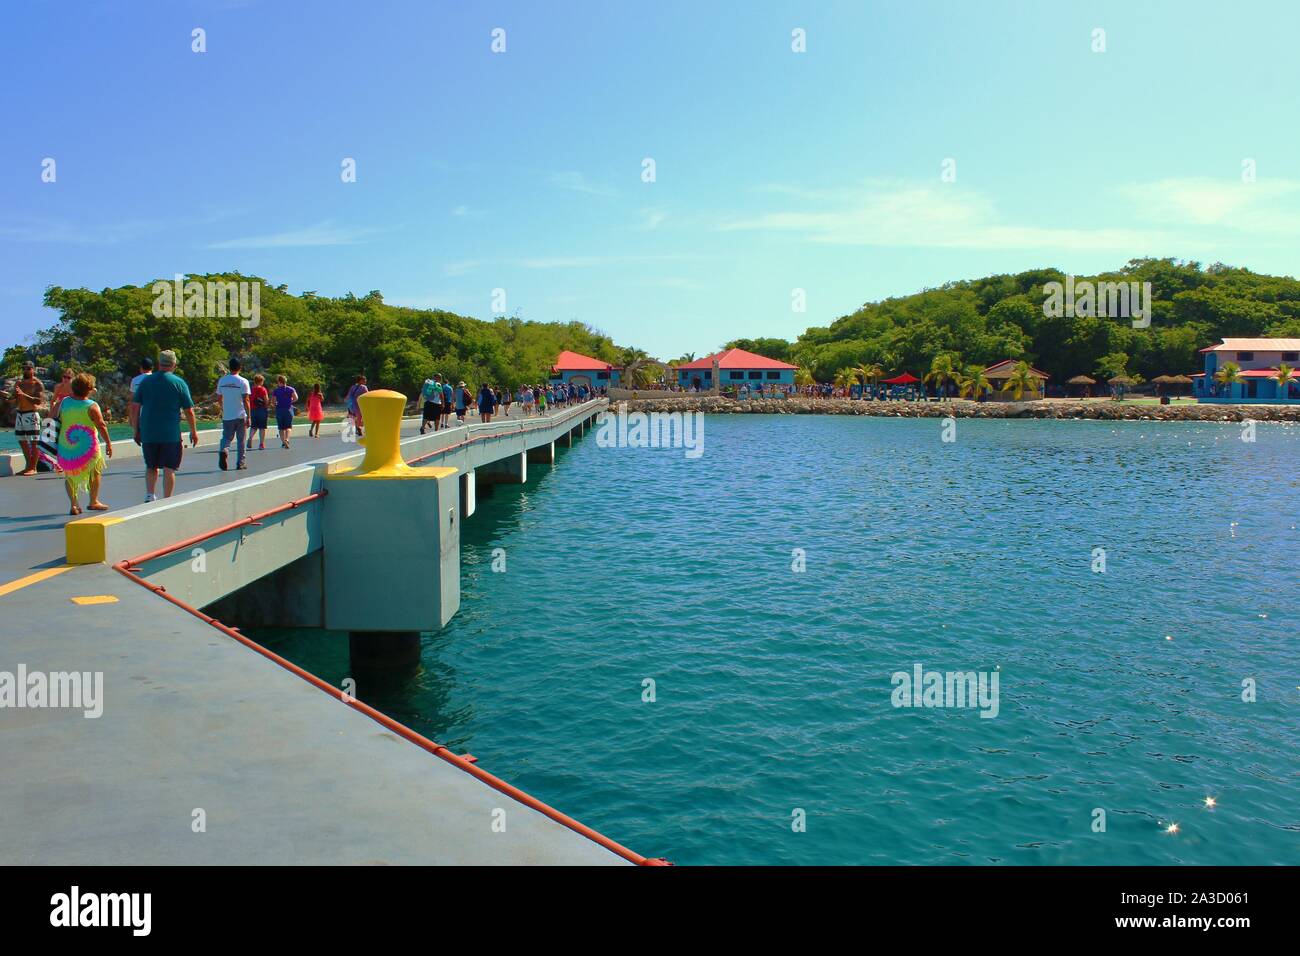 Passengers from the Royal Caribbean Anthem Of The Seas cruise ship, walk along the pier to enter the company's privately owned resort of Labadee. Stock Photo